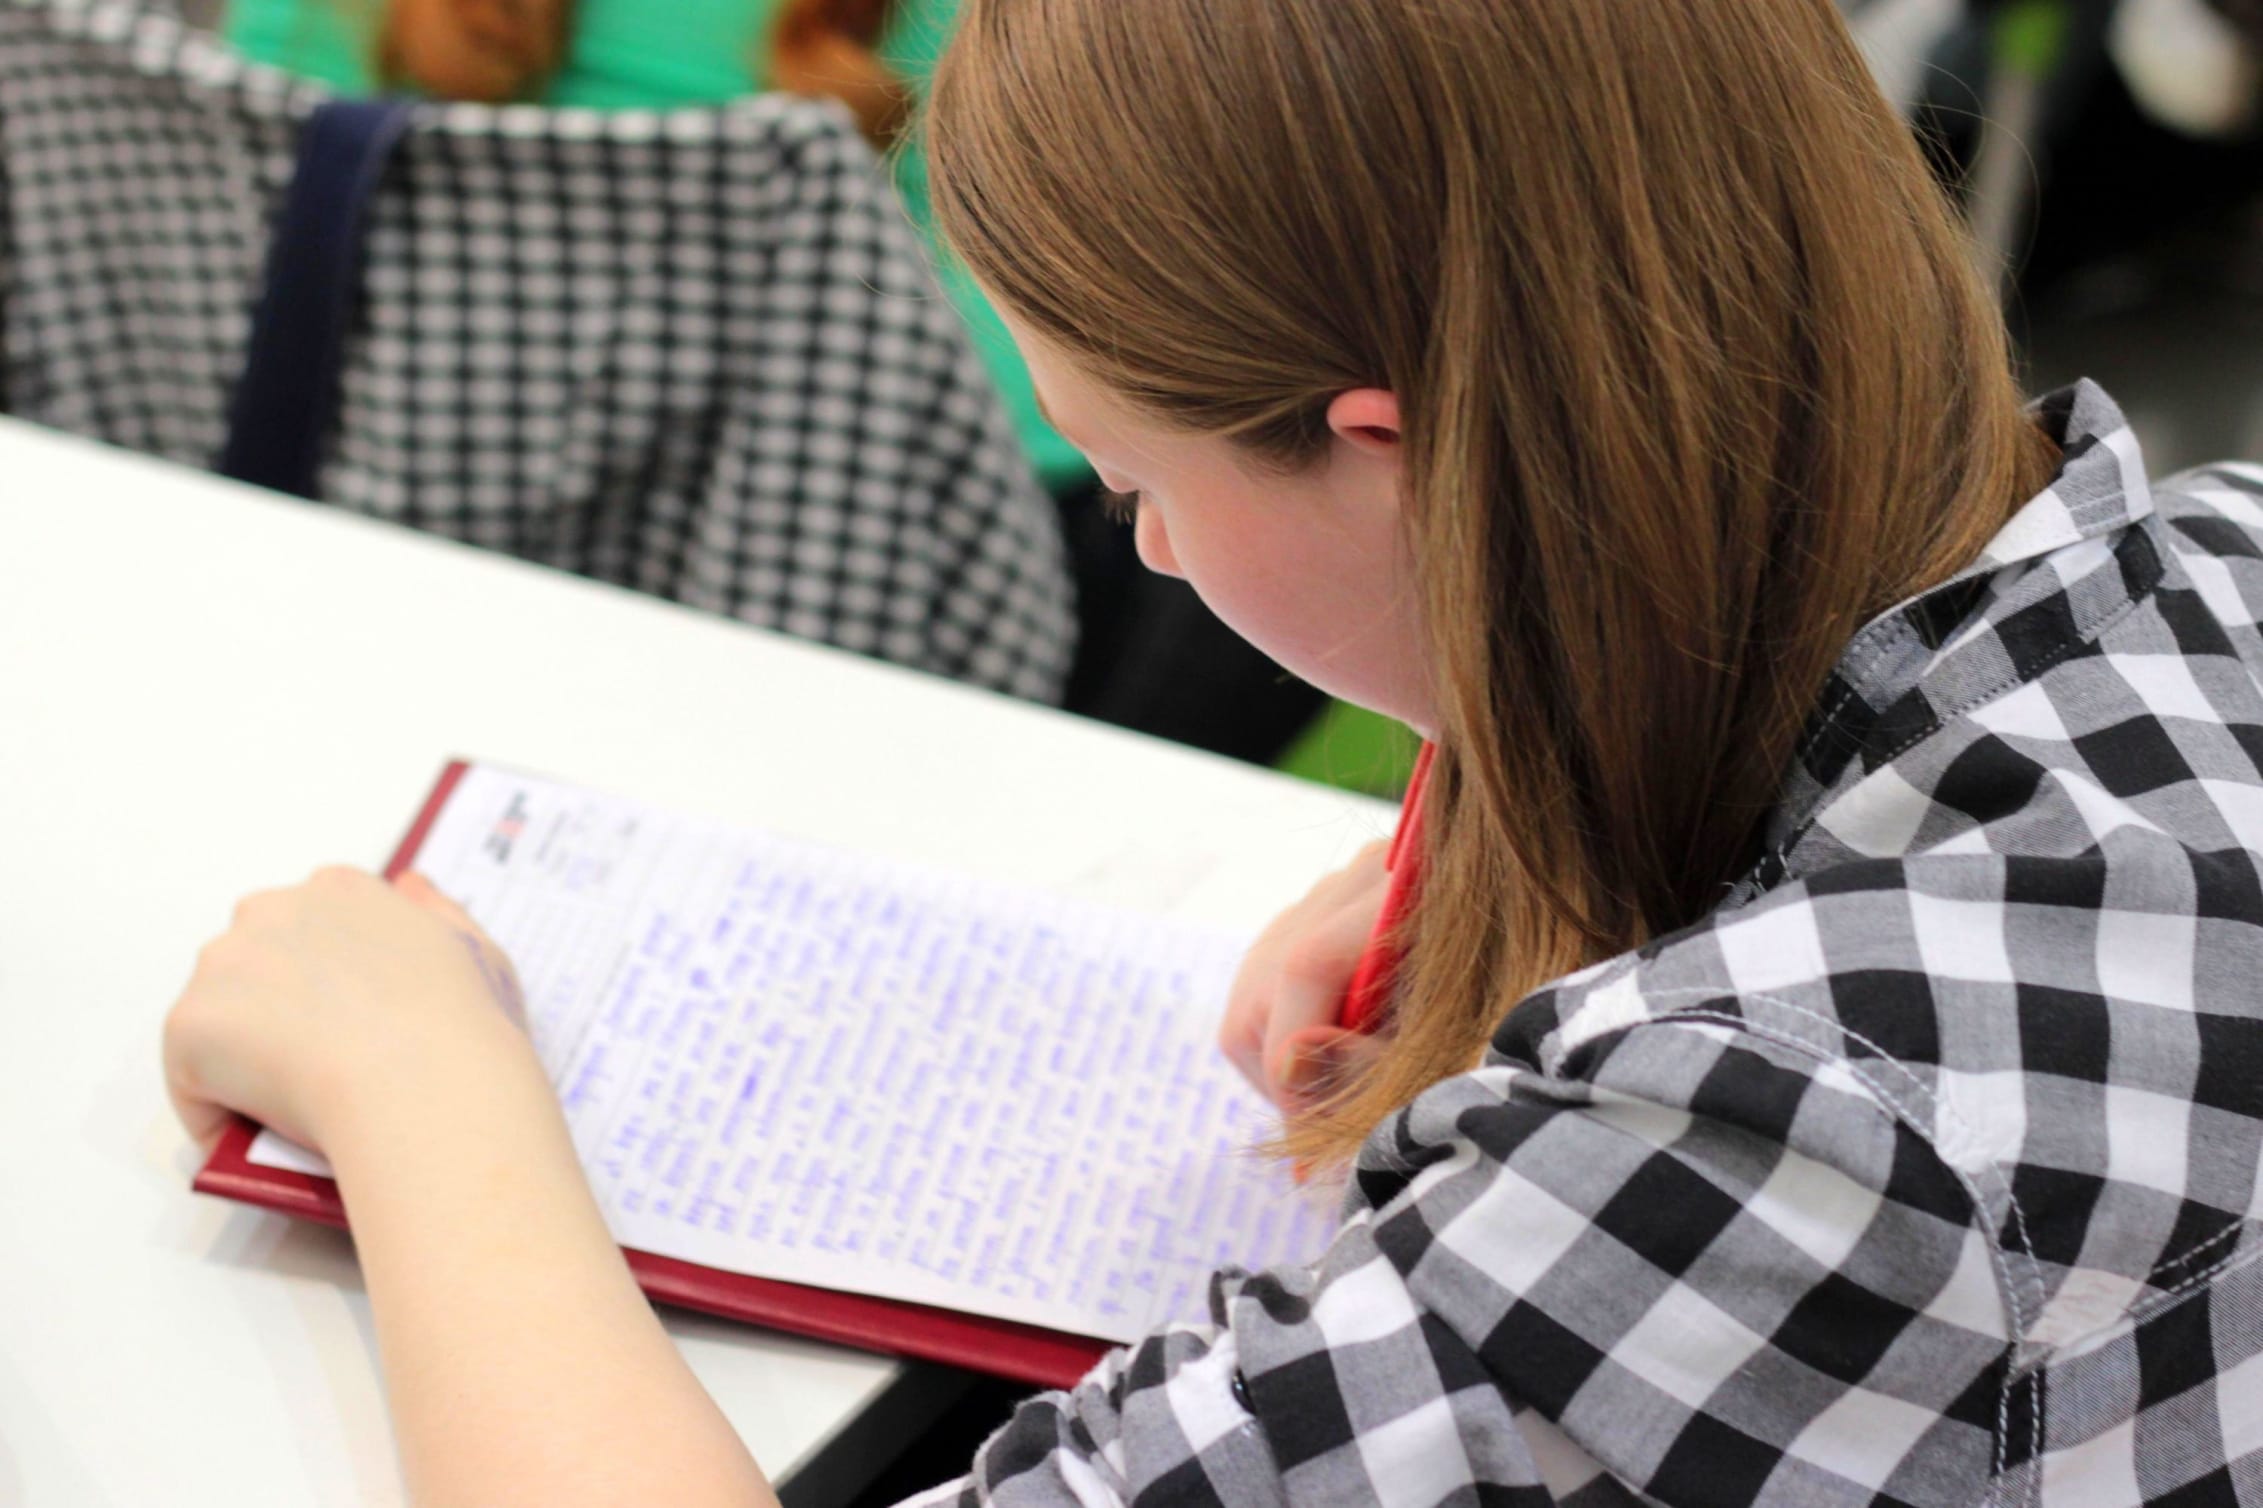 Young girl with red hair wearing a black and white checked shirt, writing in a notebook